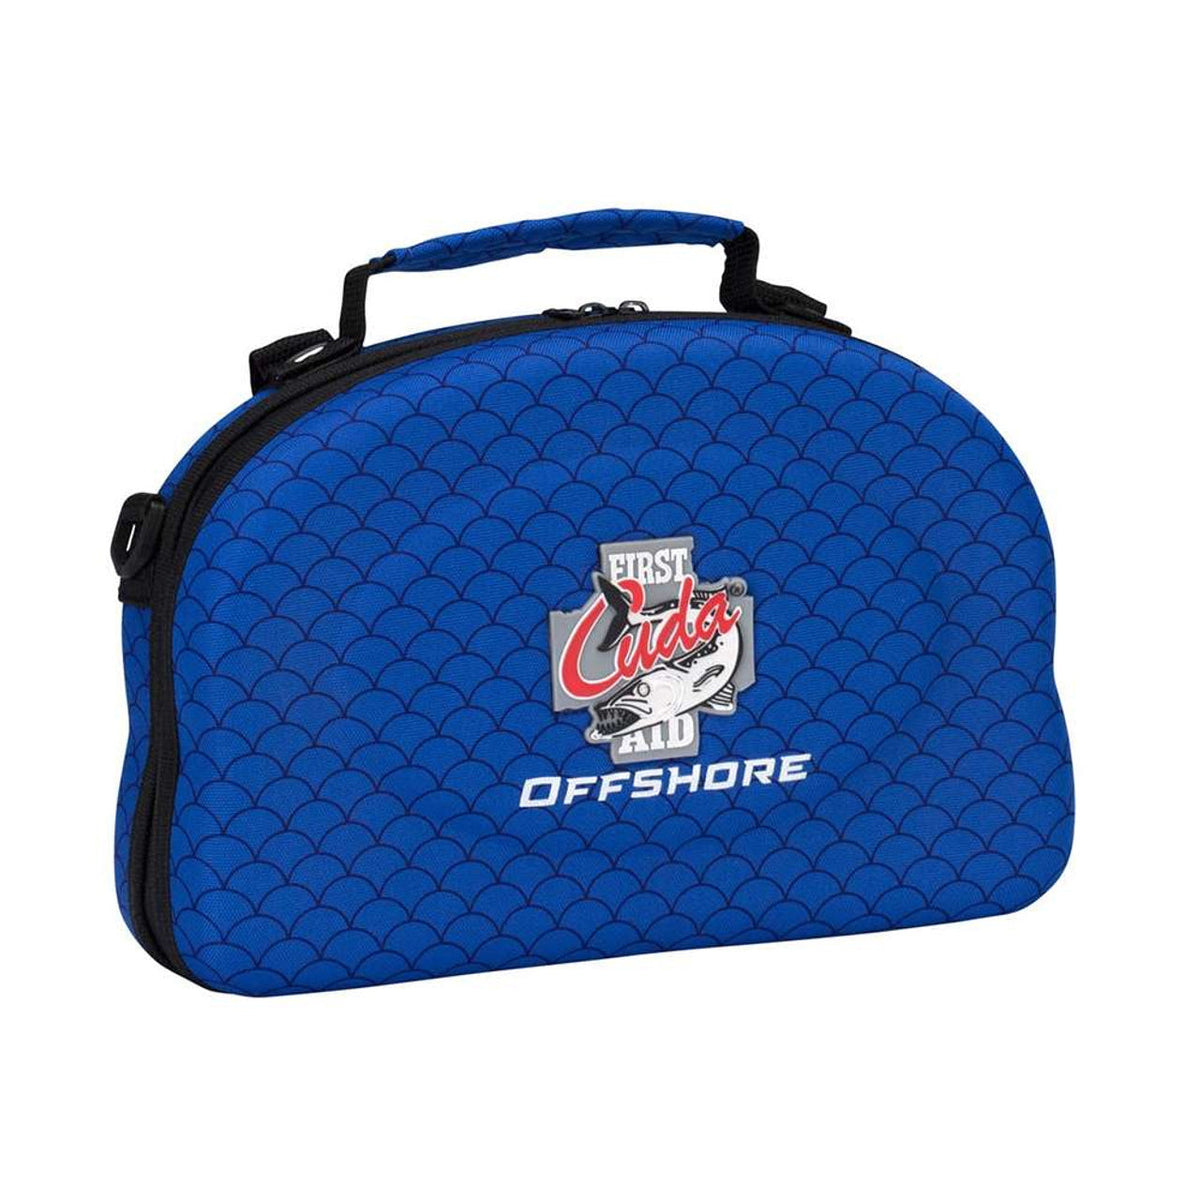 Cuda Offshore First Aid Kit Blue